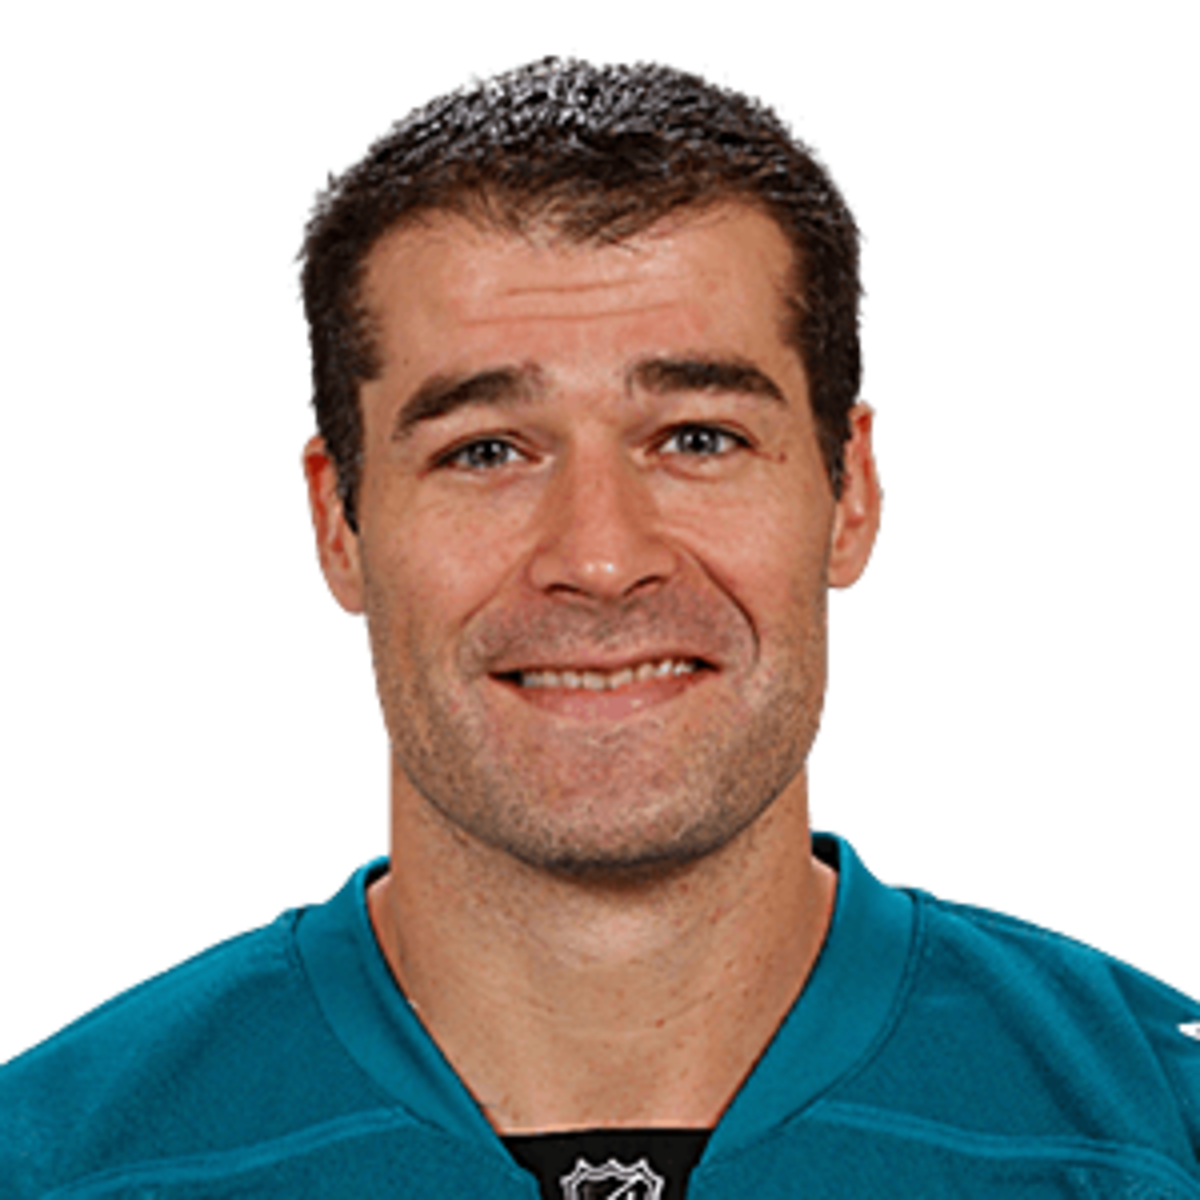 Pro or con — Should the Kings trade for Patrick Marleau? - The Athletic